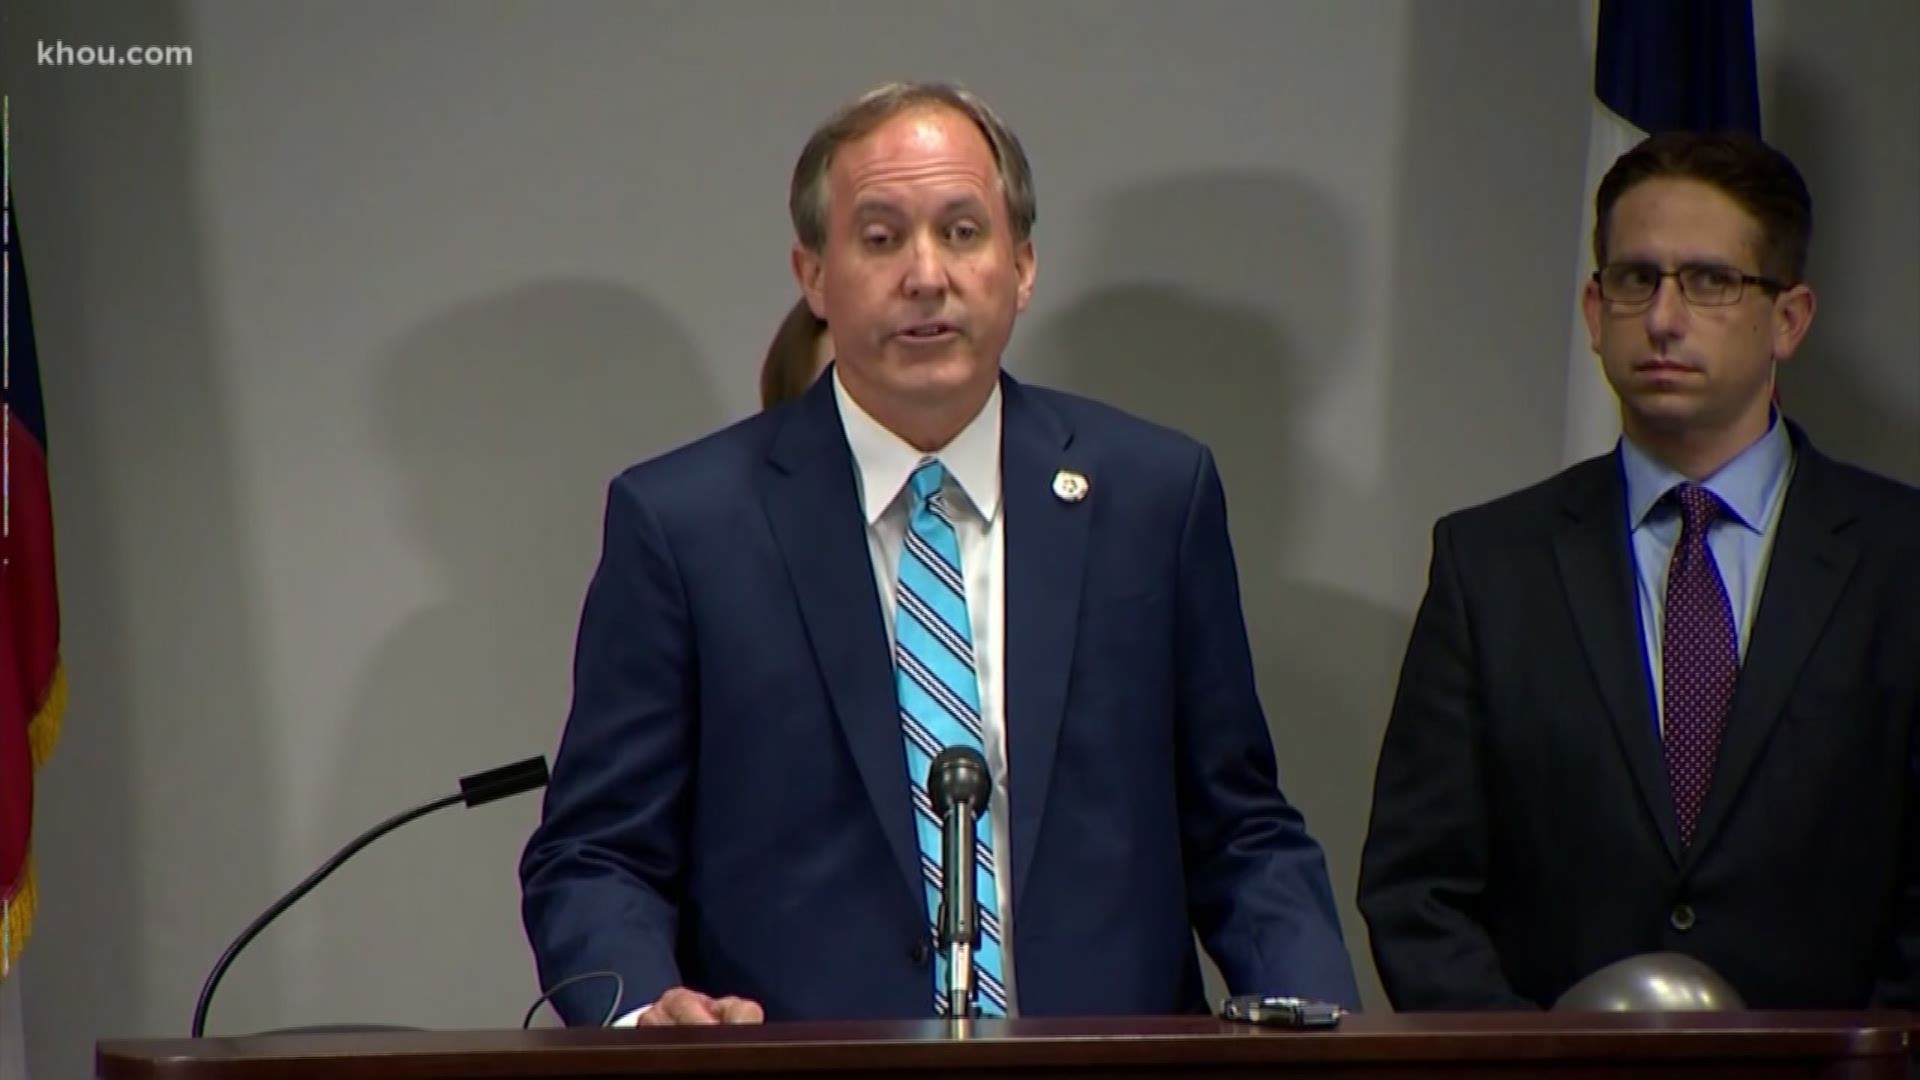 Texas Attorney General Ken Paxton in the Catholic Church's sex abuse crisis. Church leaders in Texas have identified nearly 300 priests accused of sexual abuse. Paxton is offering assistance to district attorney's across the state to pursue criminal cases against those priests.